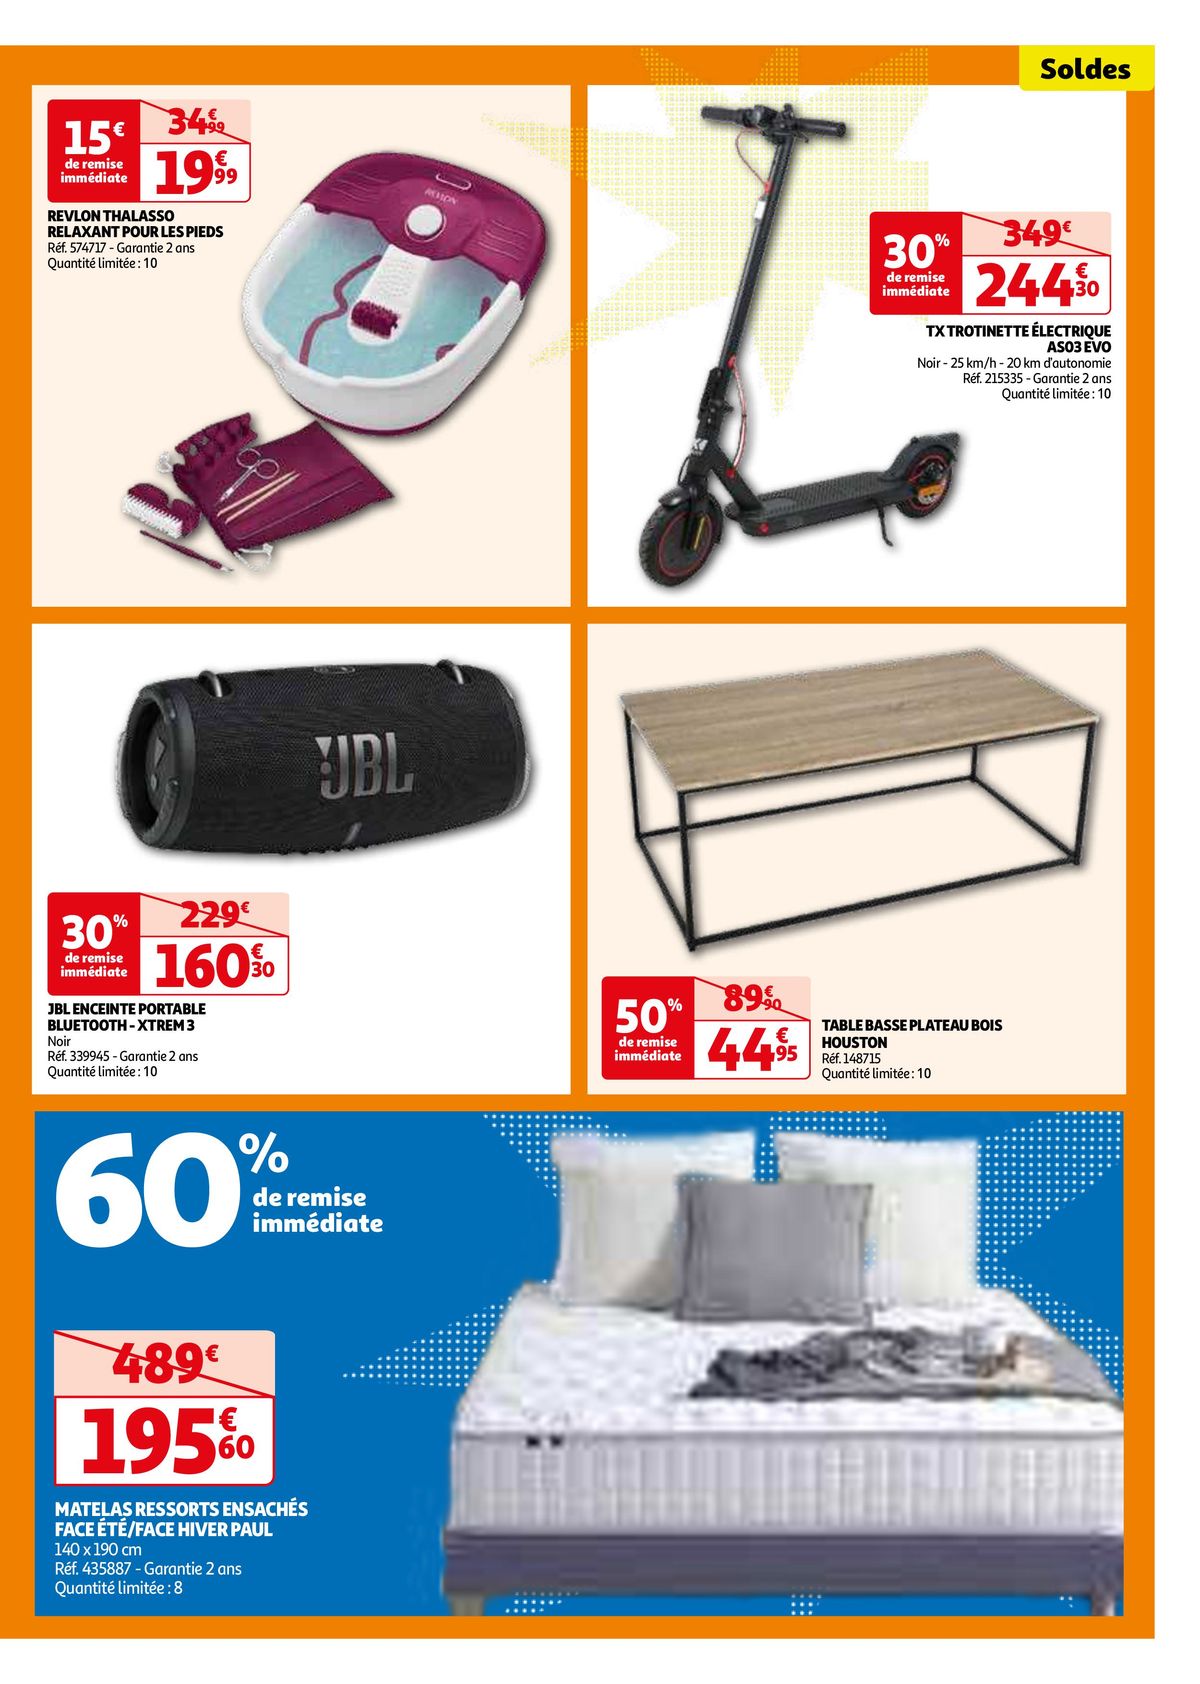 Catalogue SOLDES AUCHAN ENGLOS, page 00005